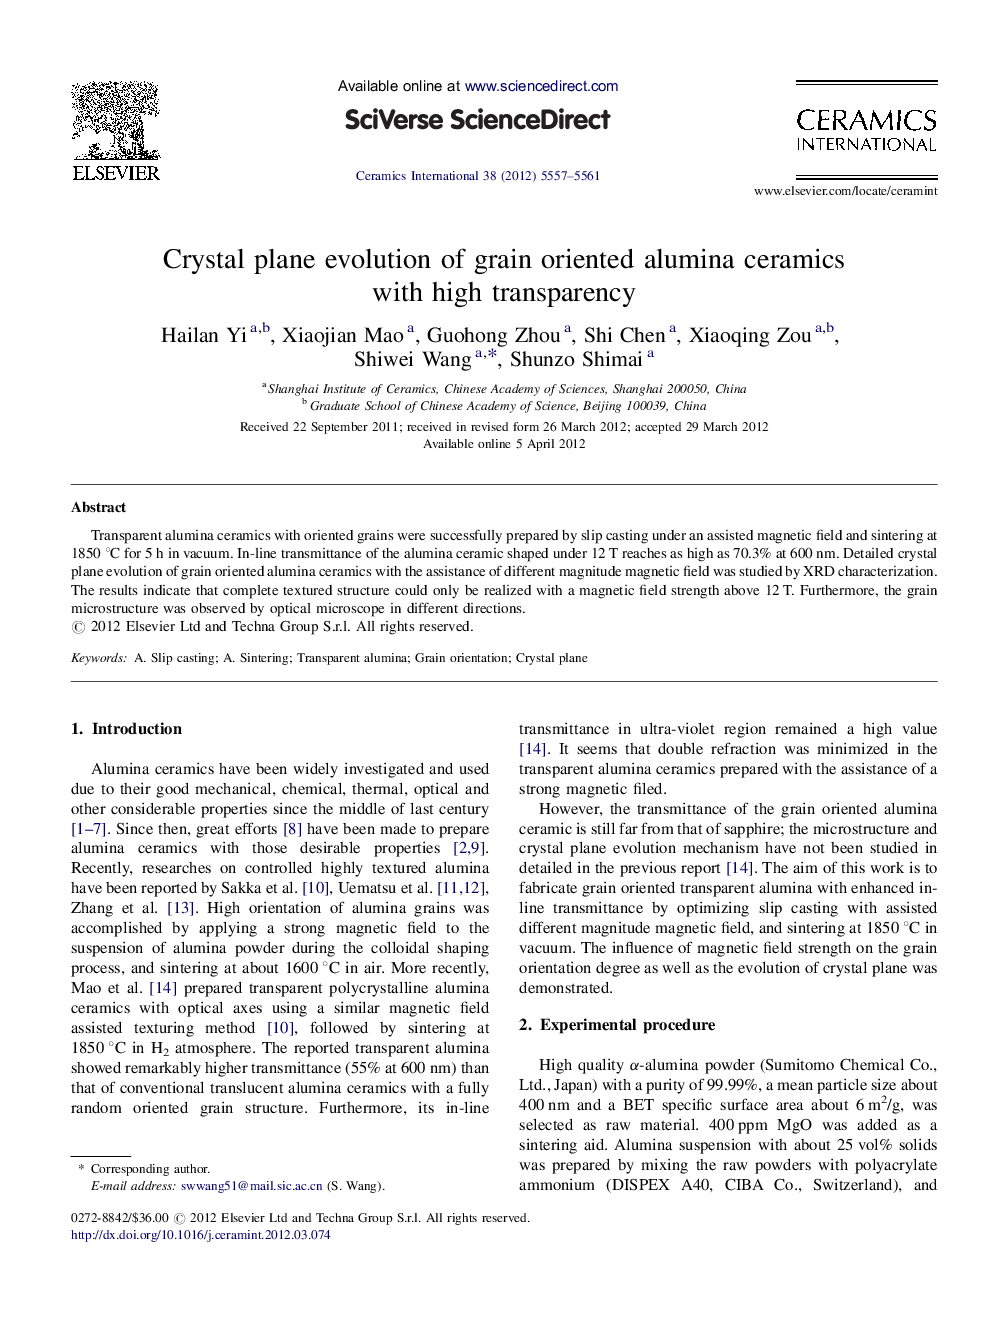 Crystal plane evolution of grain oriented alumina ceramics with high transparency